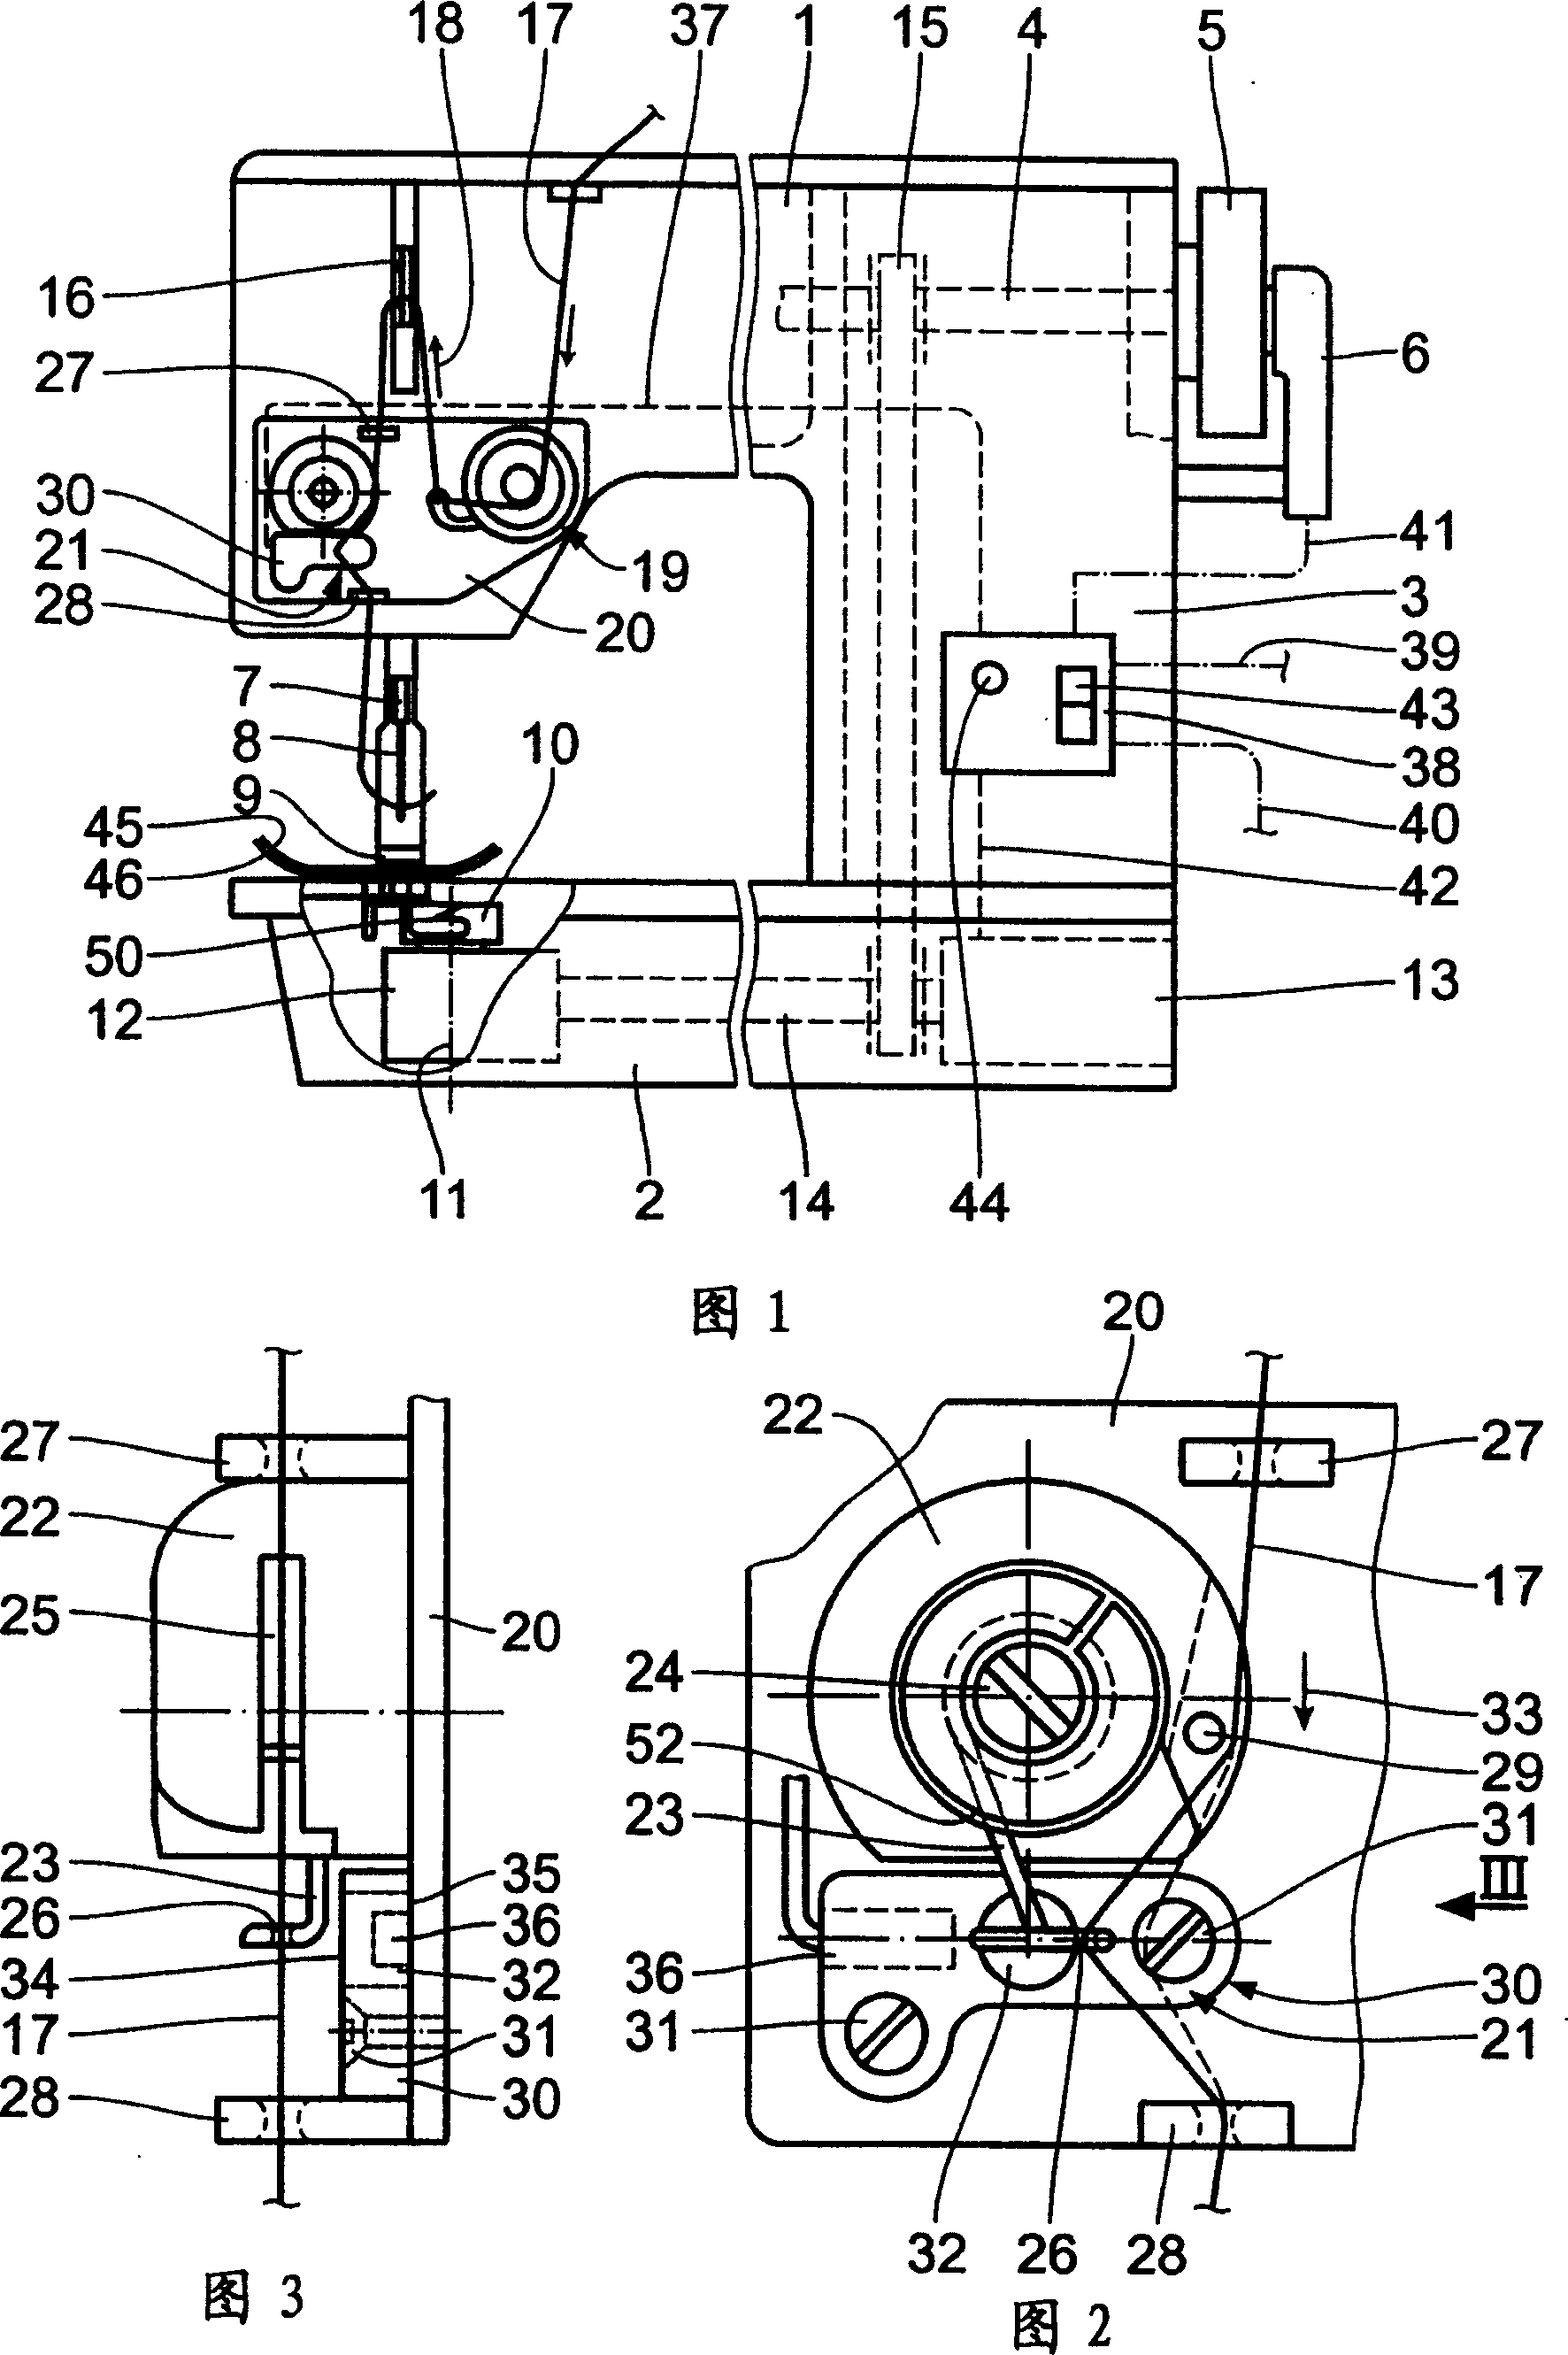 Sewing machine with faulty thread mark detection device